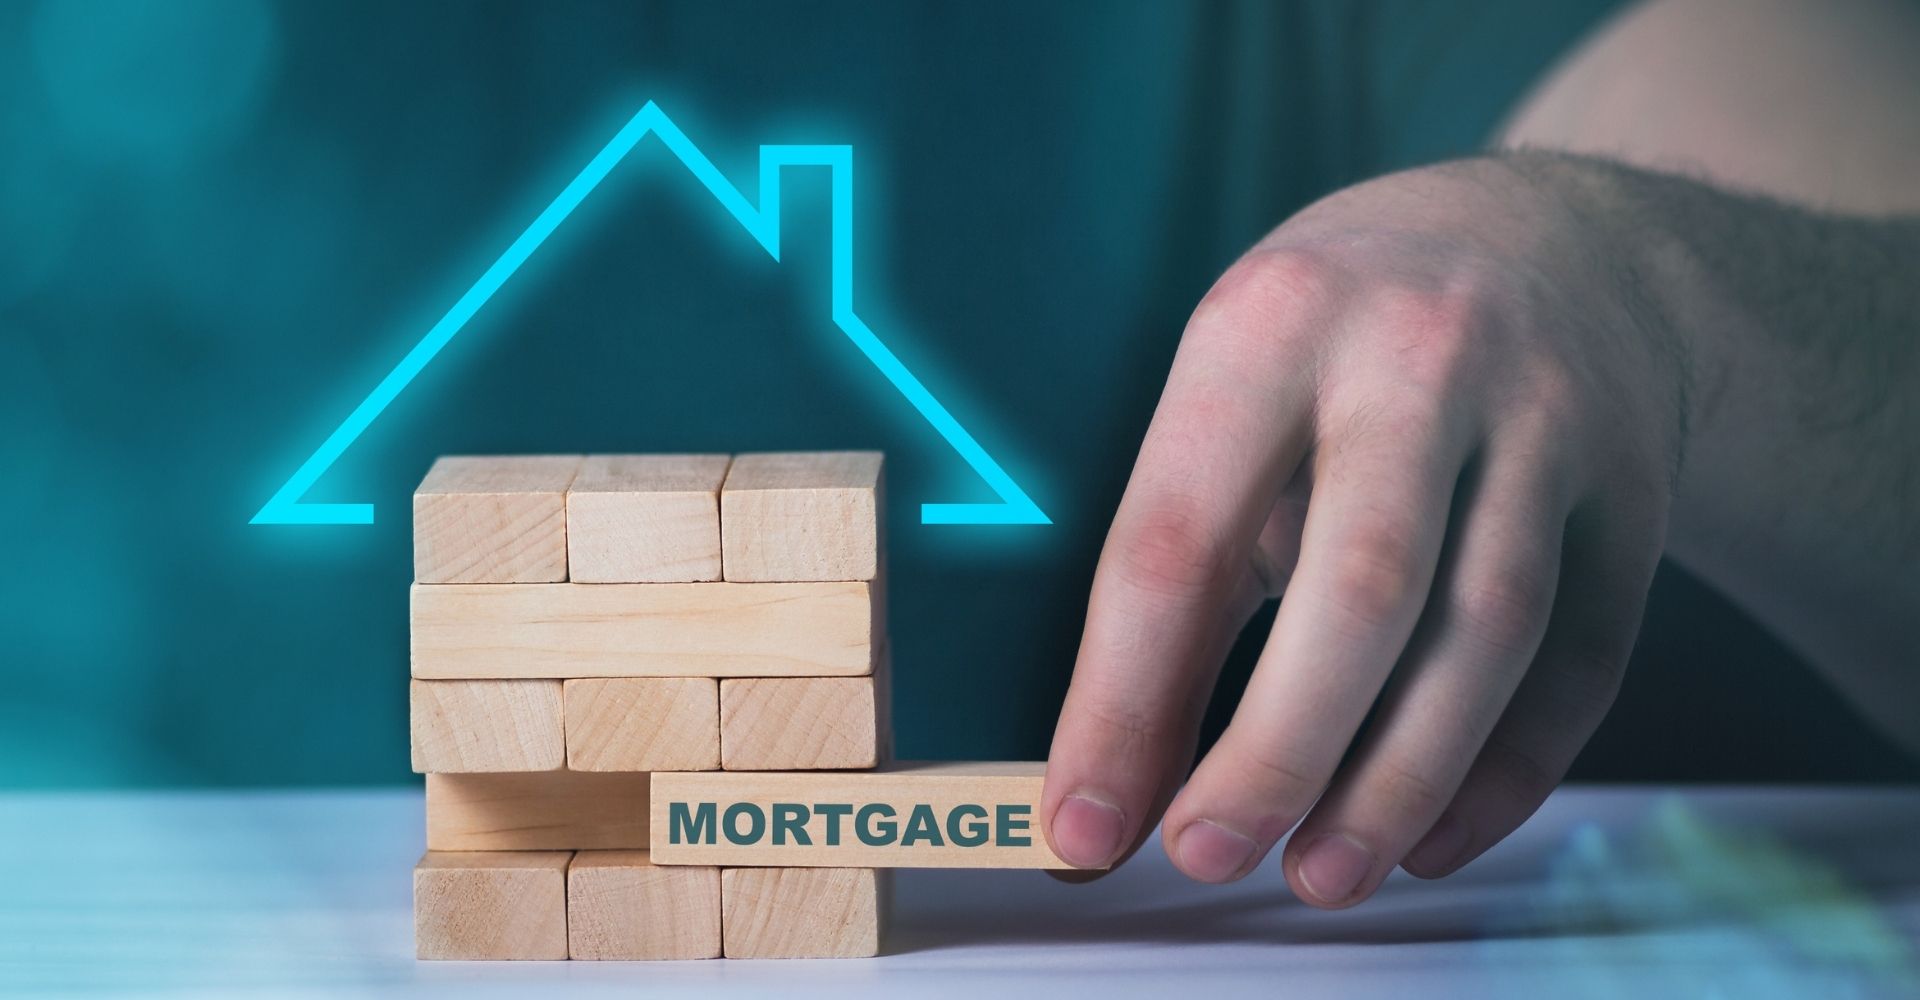 Finding a Mortgage Lender